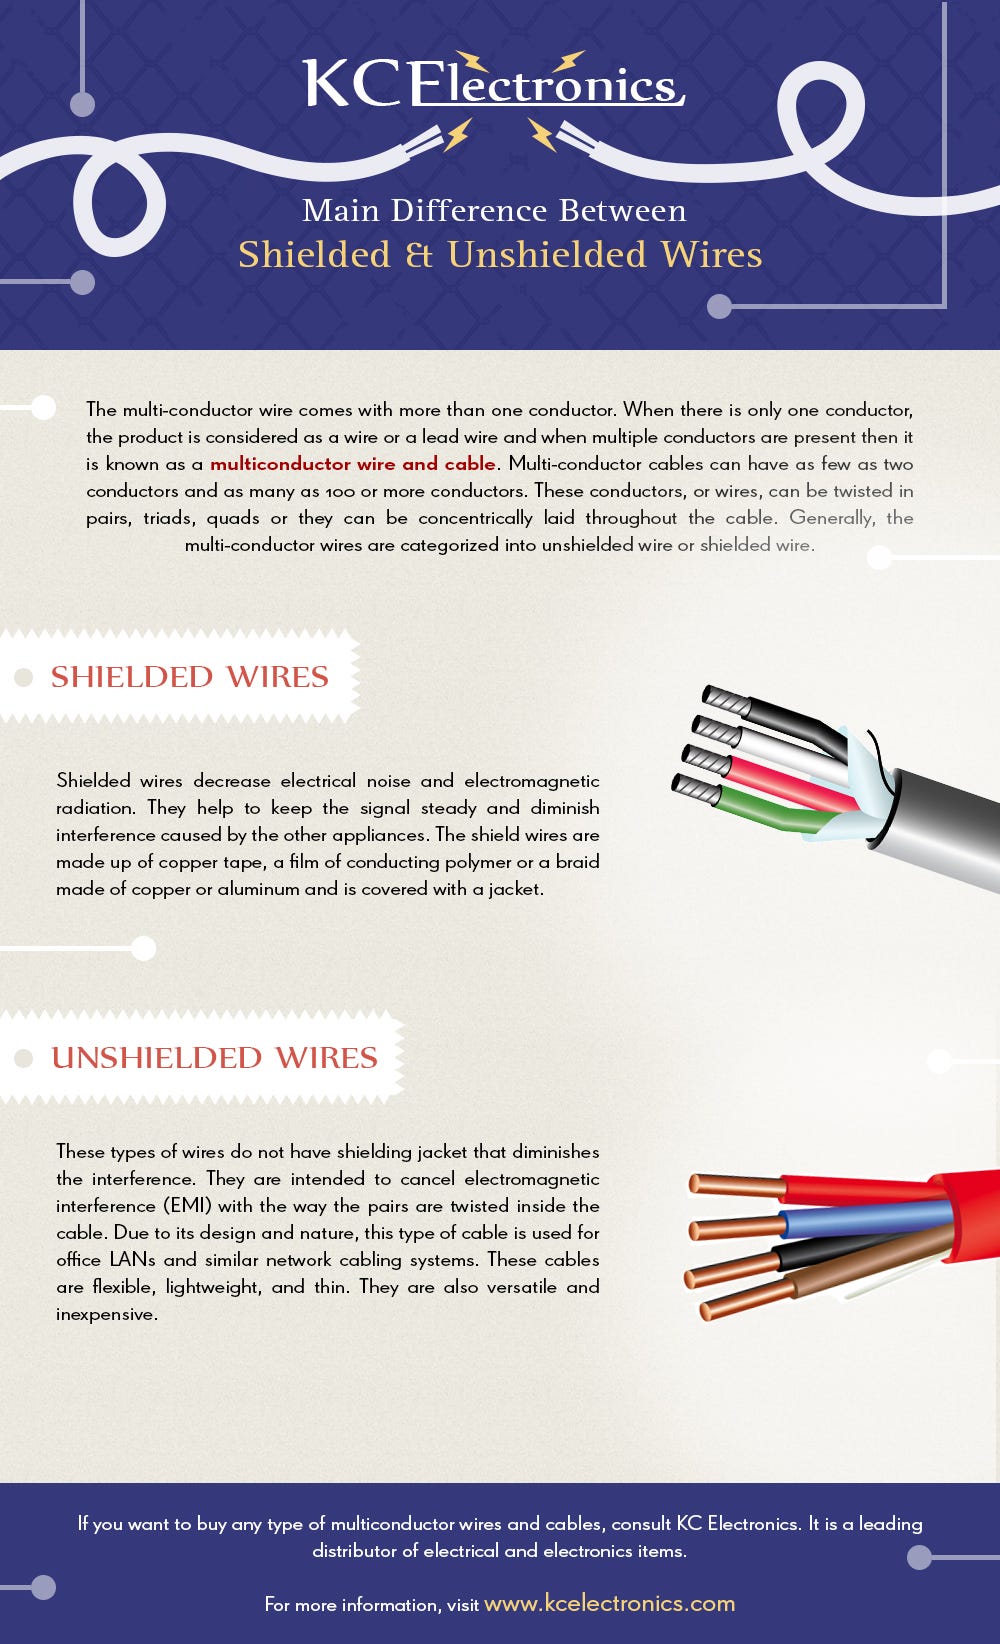 Difference Between Shielded & Unshielded Wire